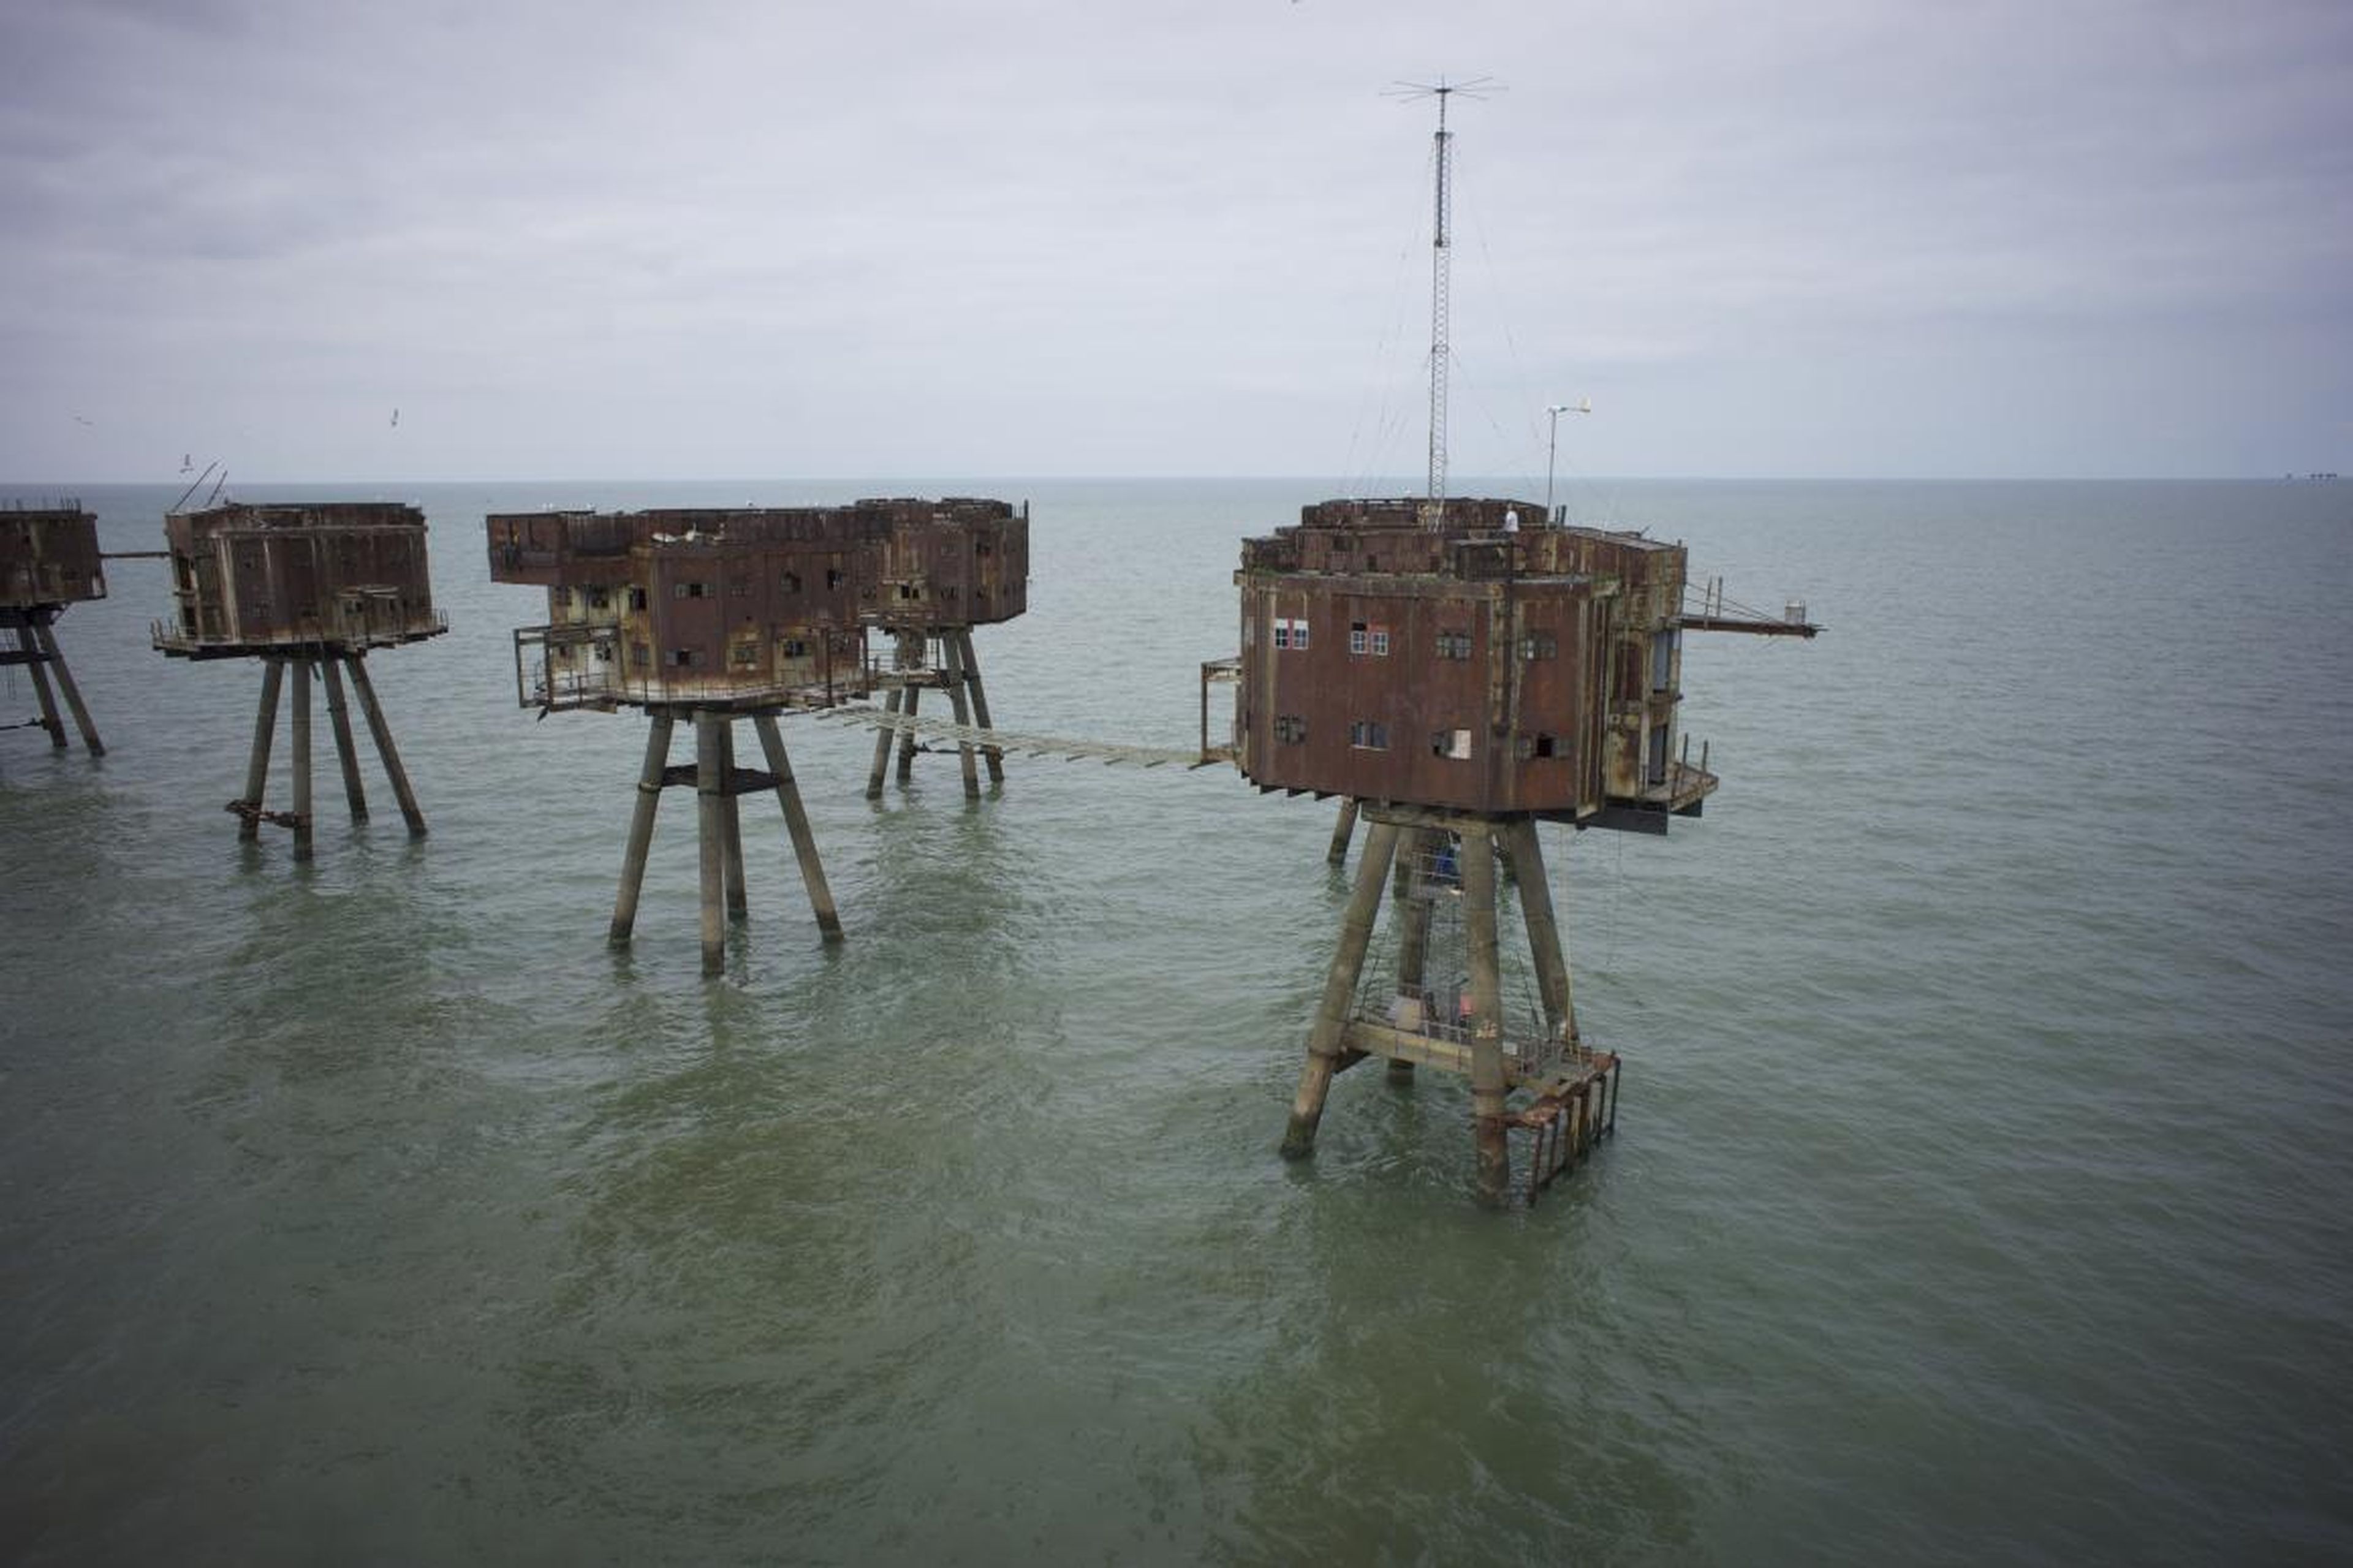 These forts have been abandoned since that 1950s.